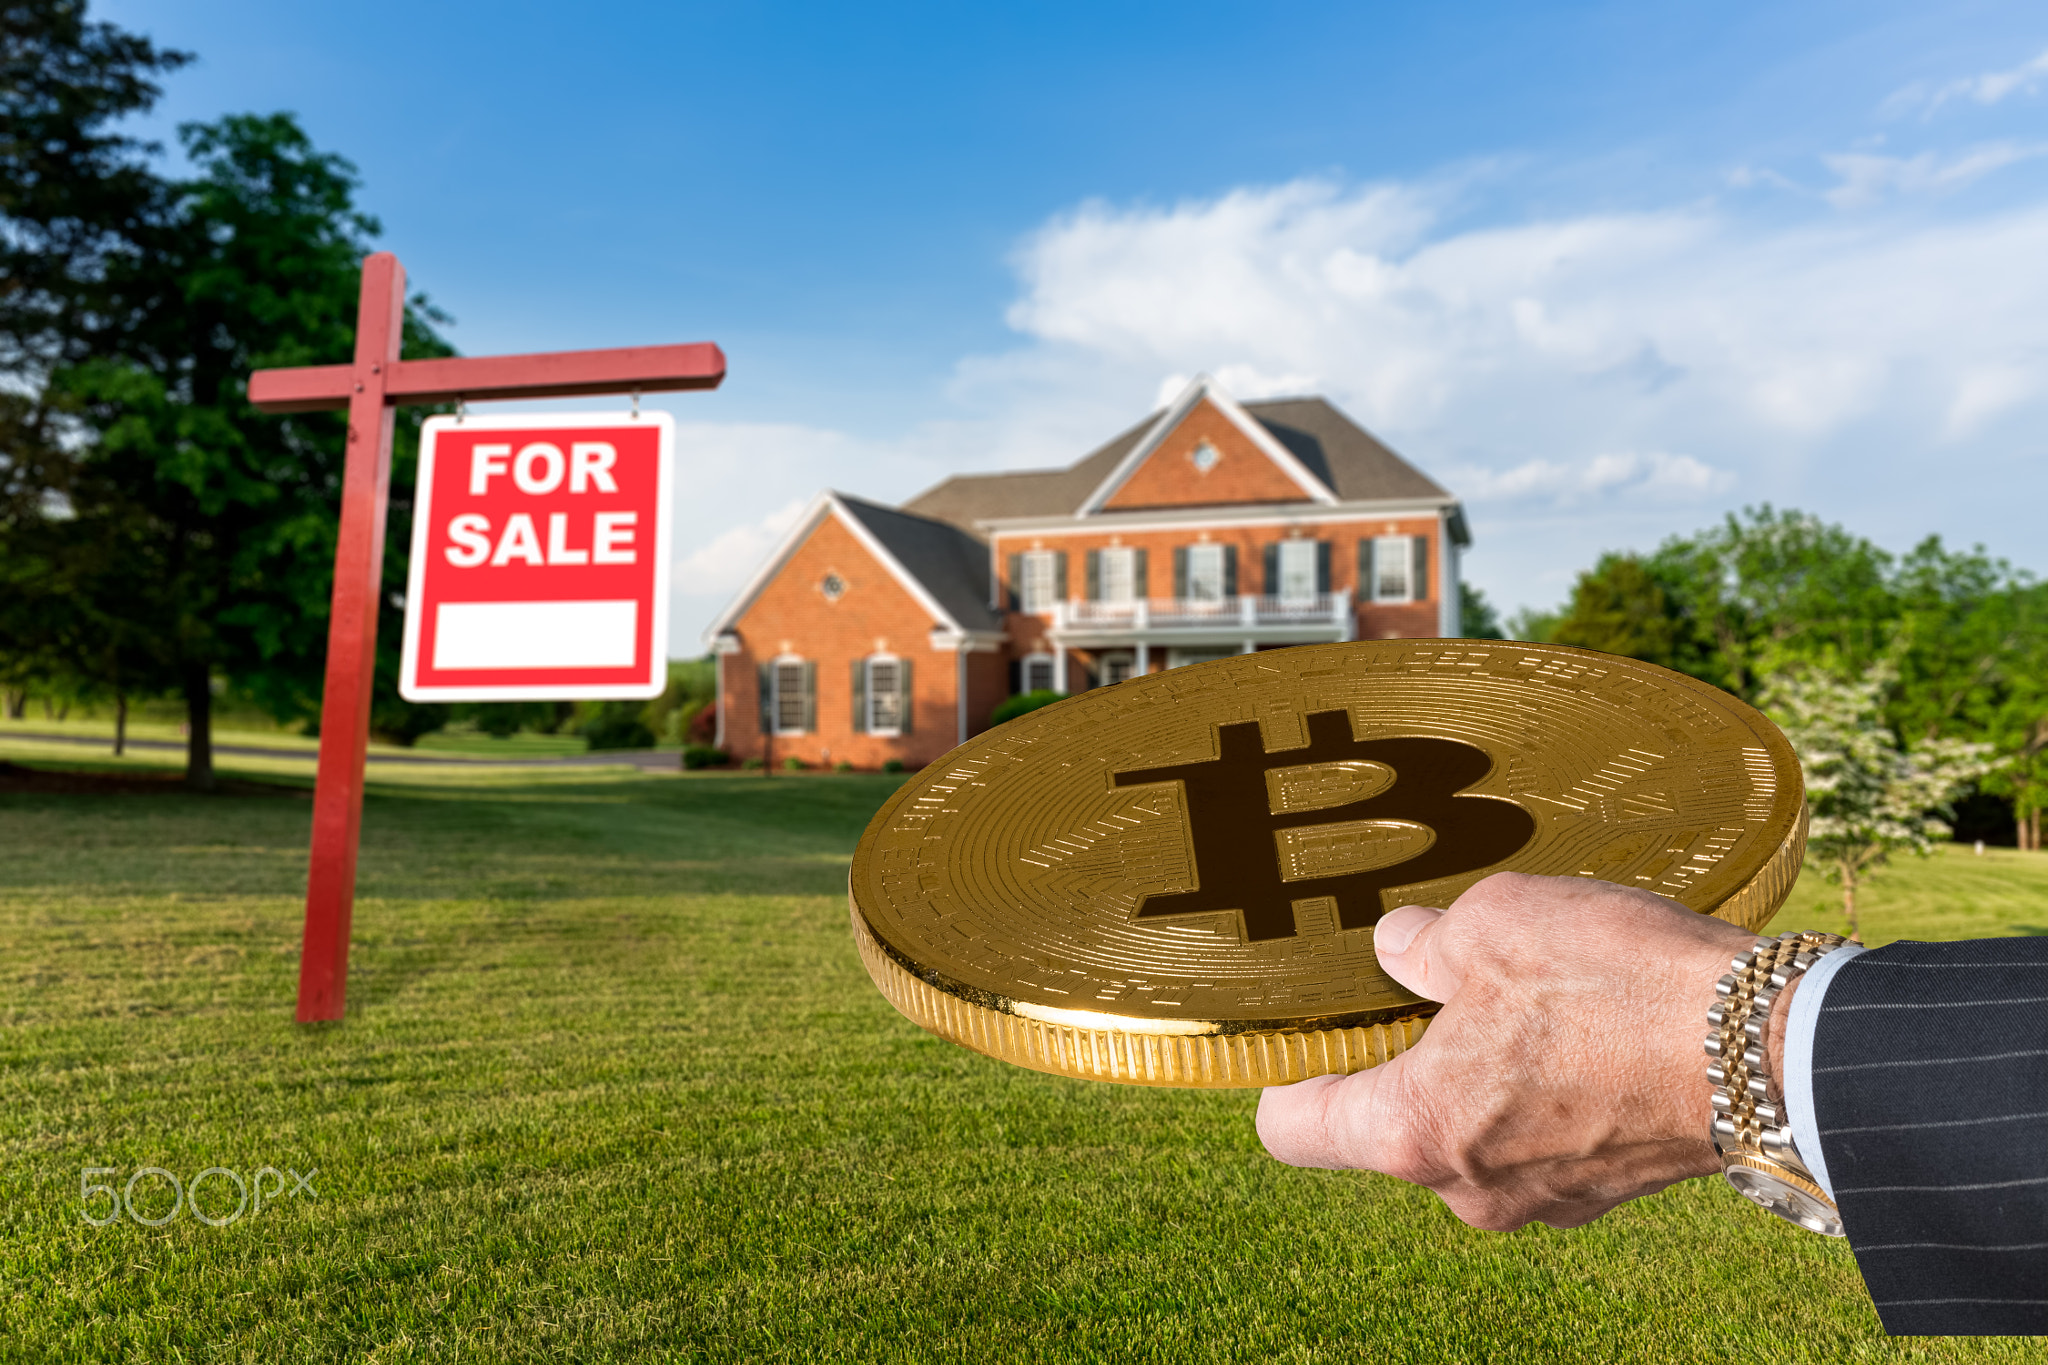 Businessman hand offering Bitcoin to buy house